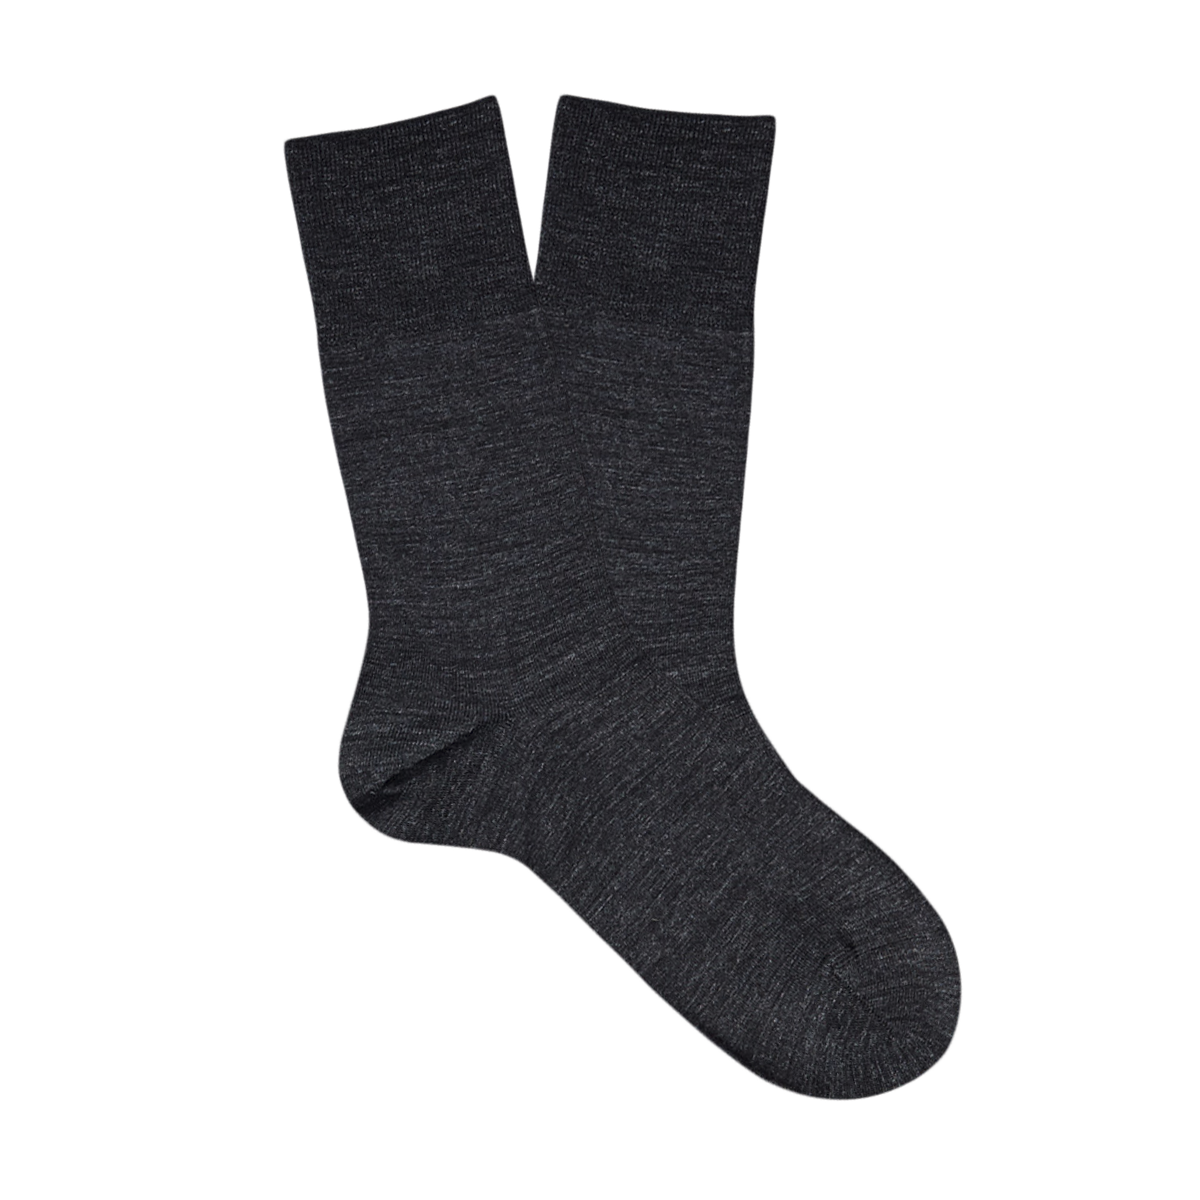 A pair of Falke Grey Airport Wool Cotton Socks on a white surface.